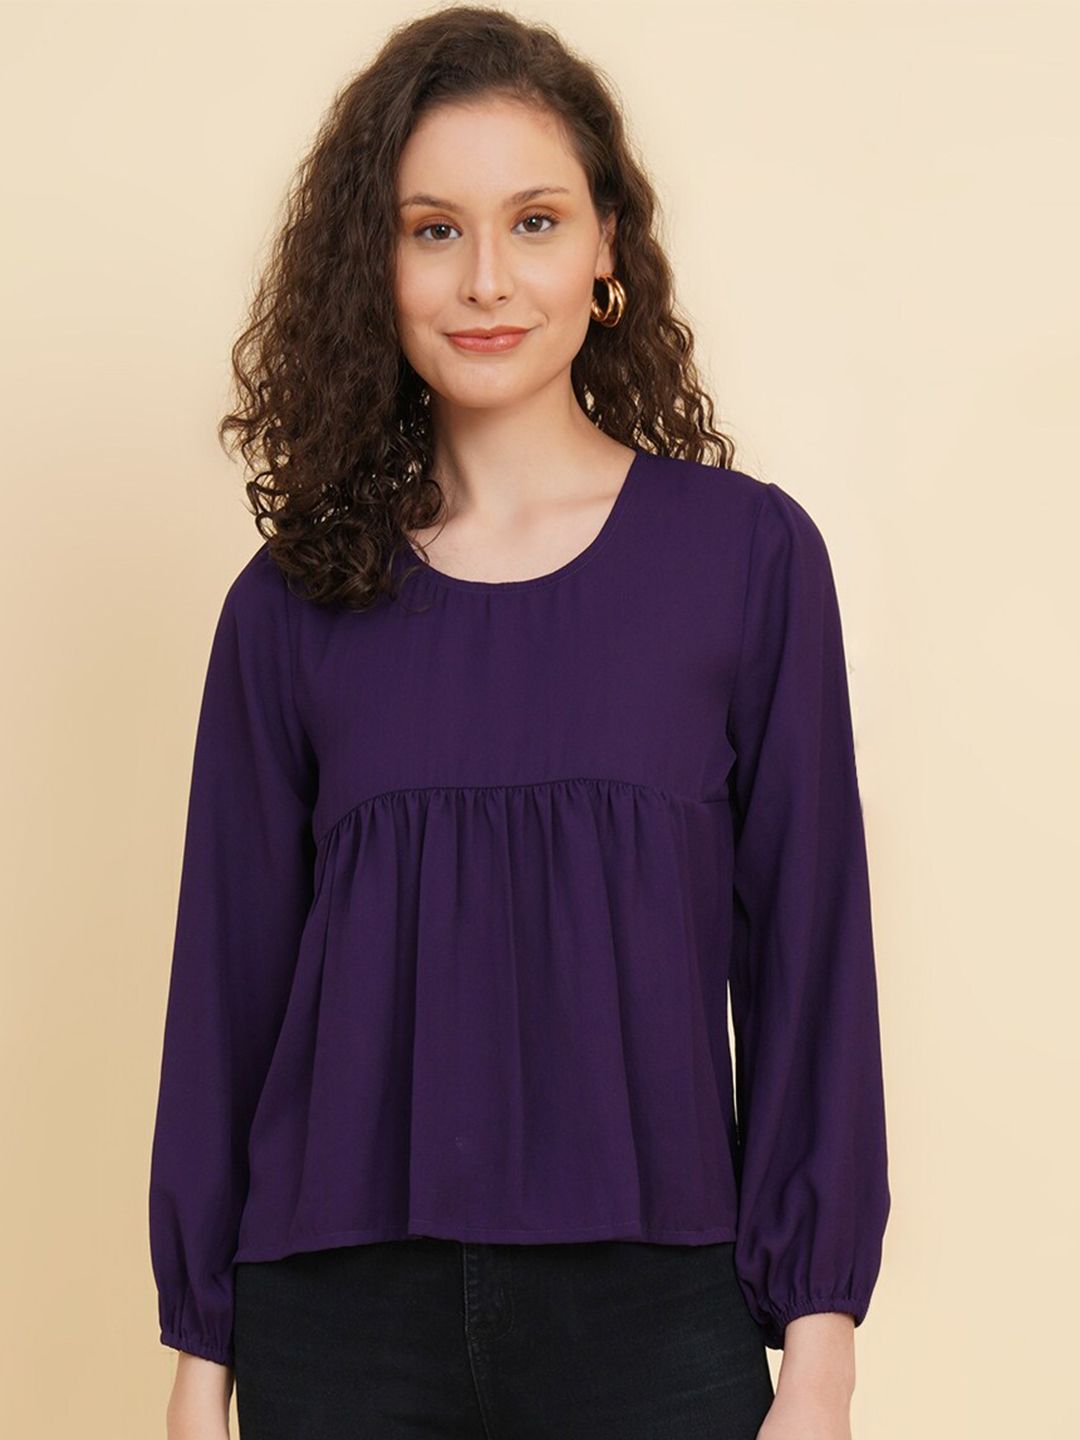 RAASSIO Cuffed Sleeves Empire Top Price in India